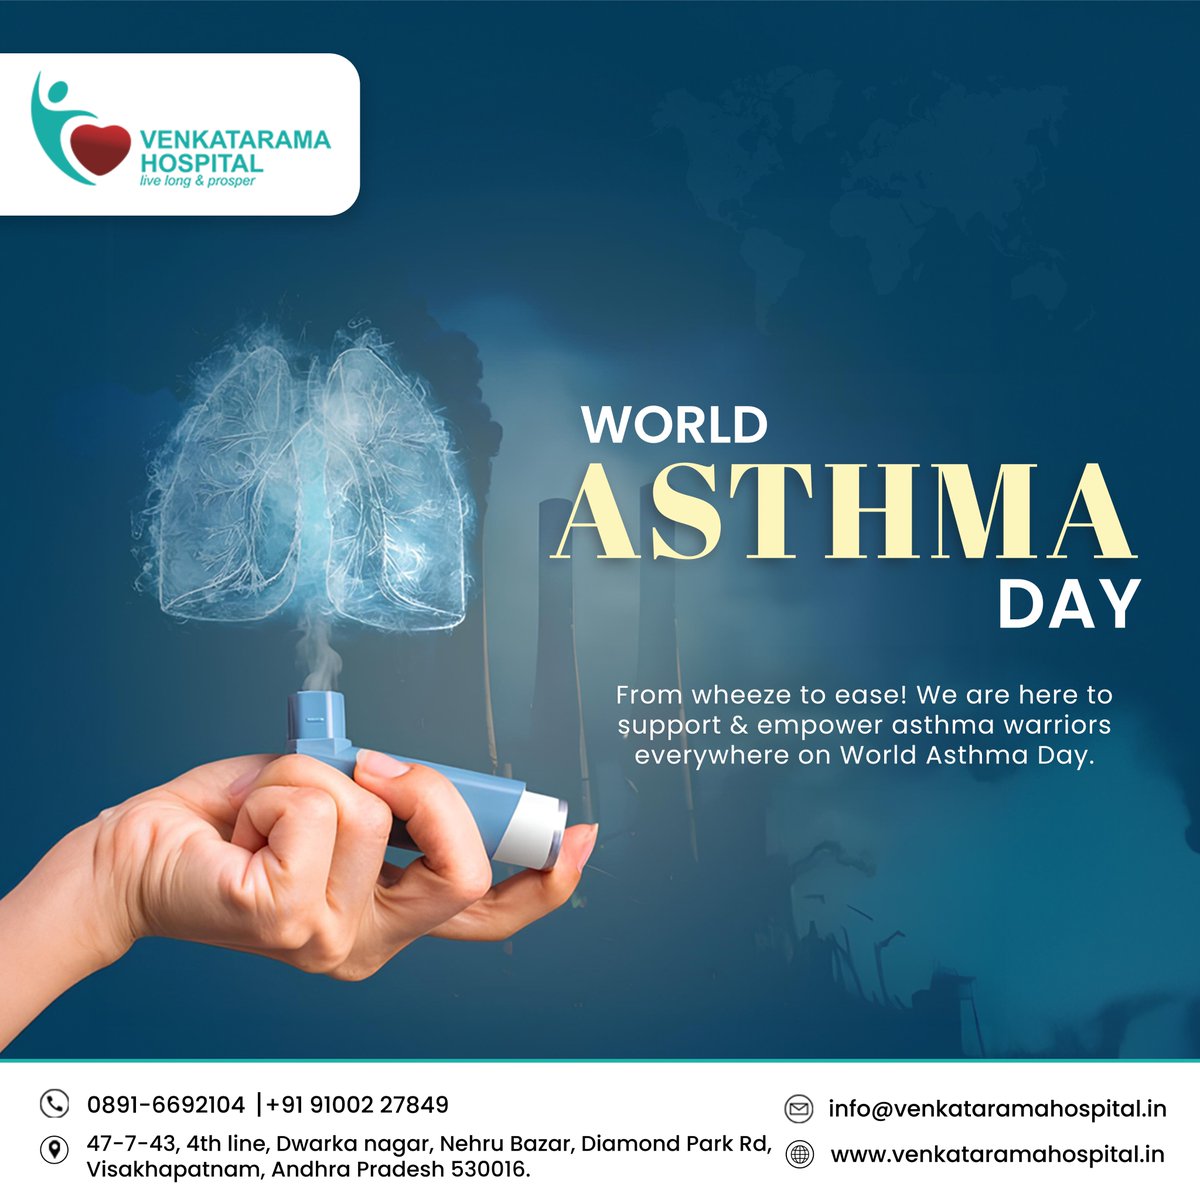 Breath easy, live better! Join us at Venkatarama Hospitals as we raise awareness and support for World Asthma Day. Let's breathe together for a healthier tomorrow.
.
#venkataramhospitals #vizag #dwarakanagar #worldasthmaday #AsthmaAwareness #BreatheEasy #Healthcare #LungHealth